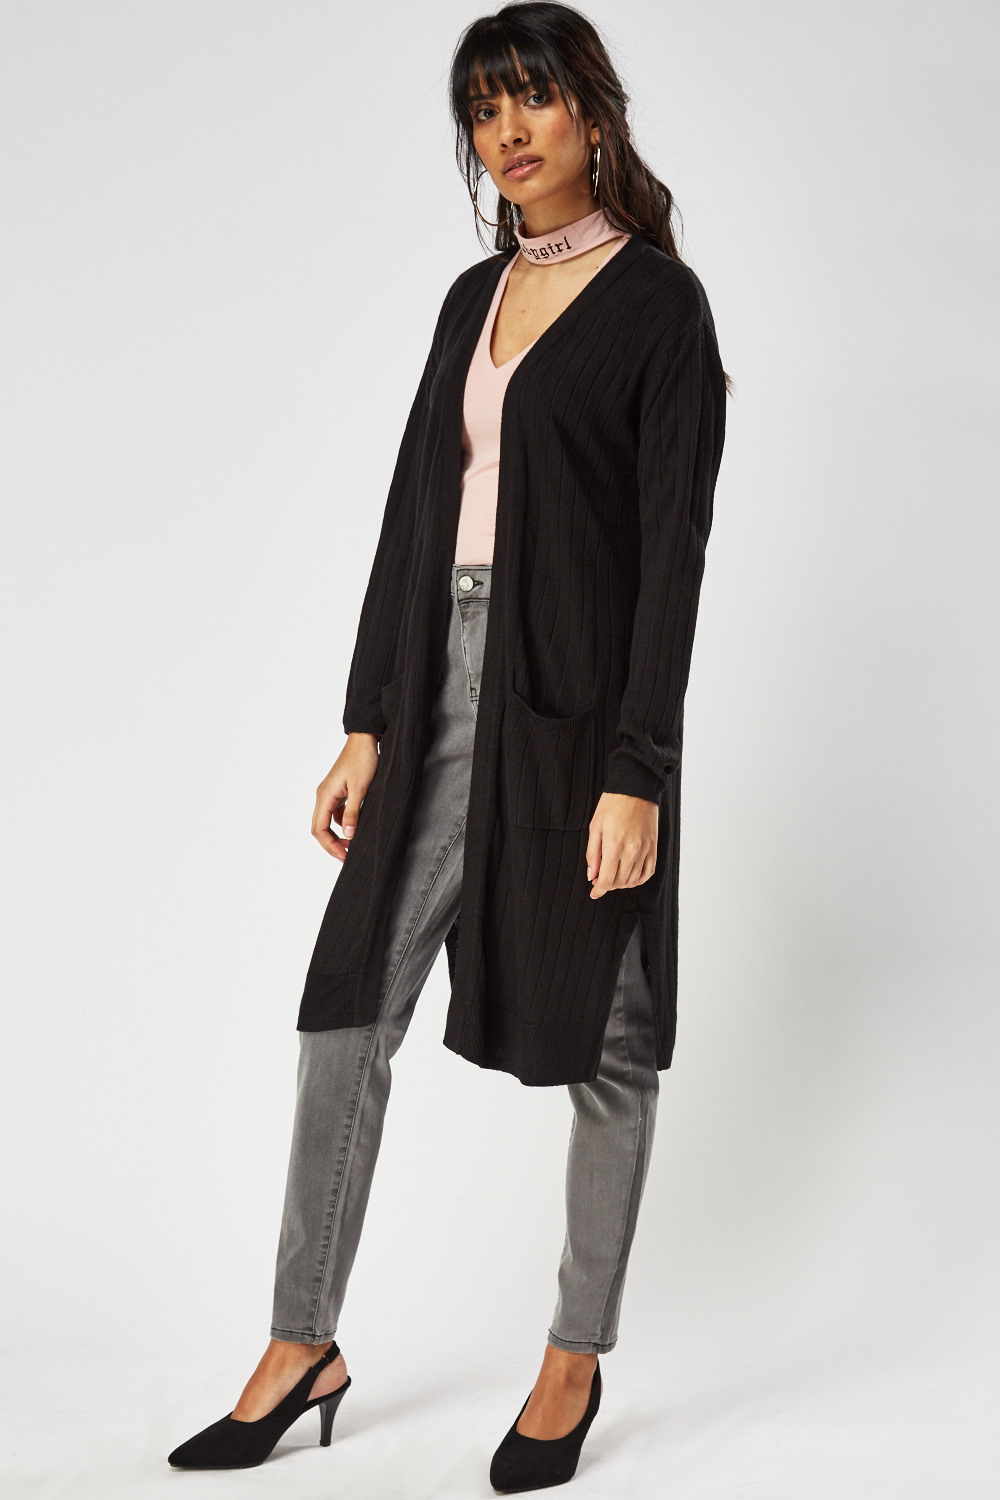 Ribbed Thin Knitted Long Cardigan - Just $7